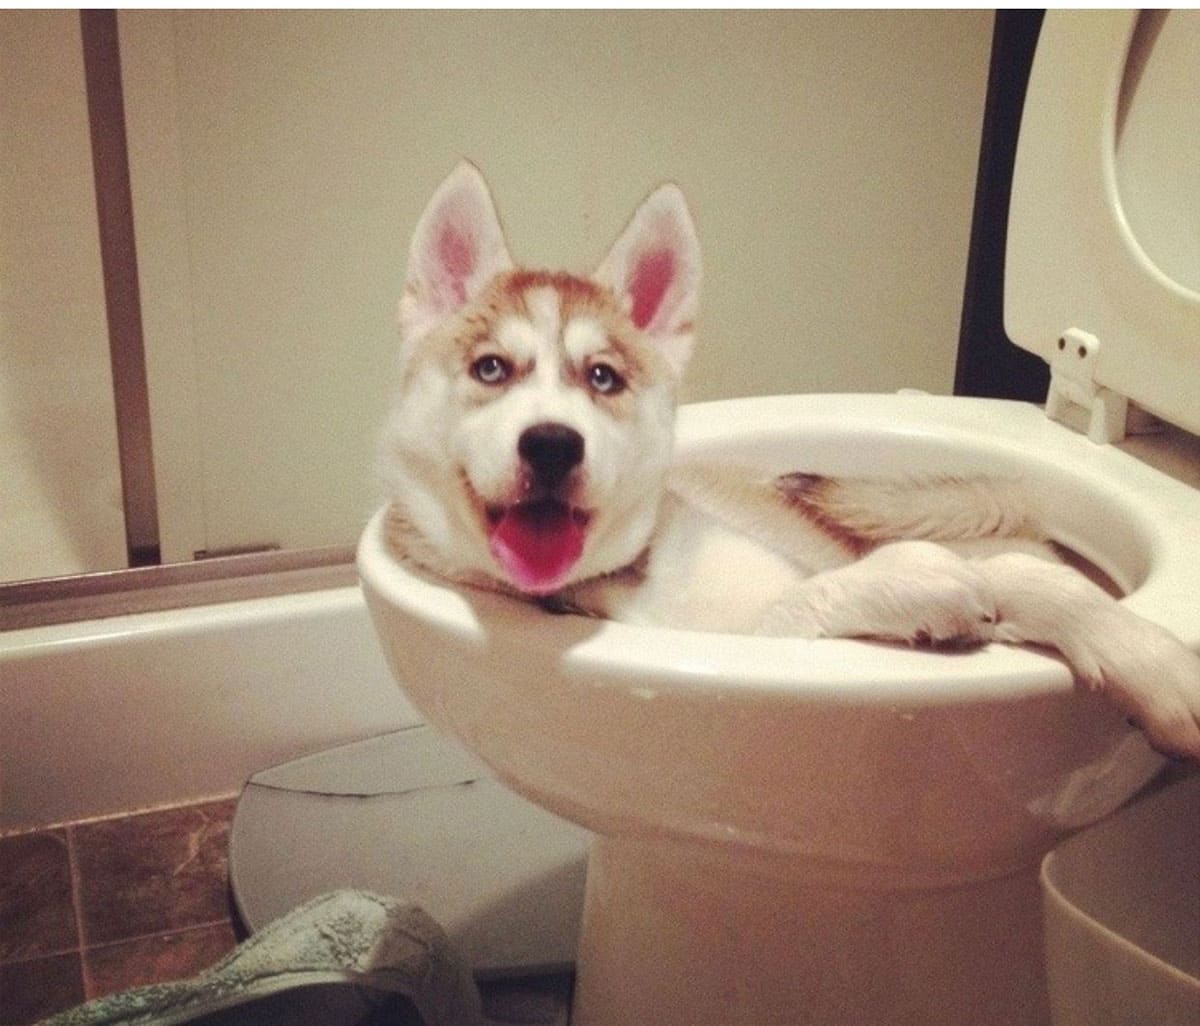 Husky in a toilet bowl